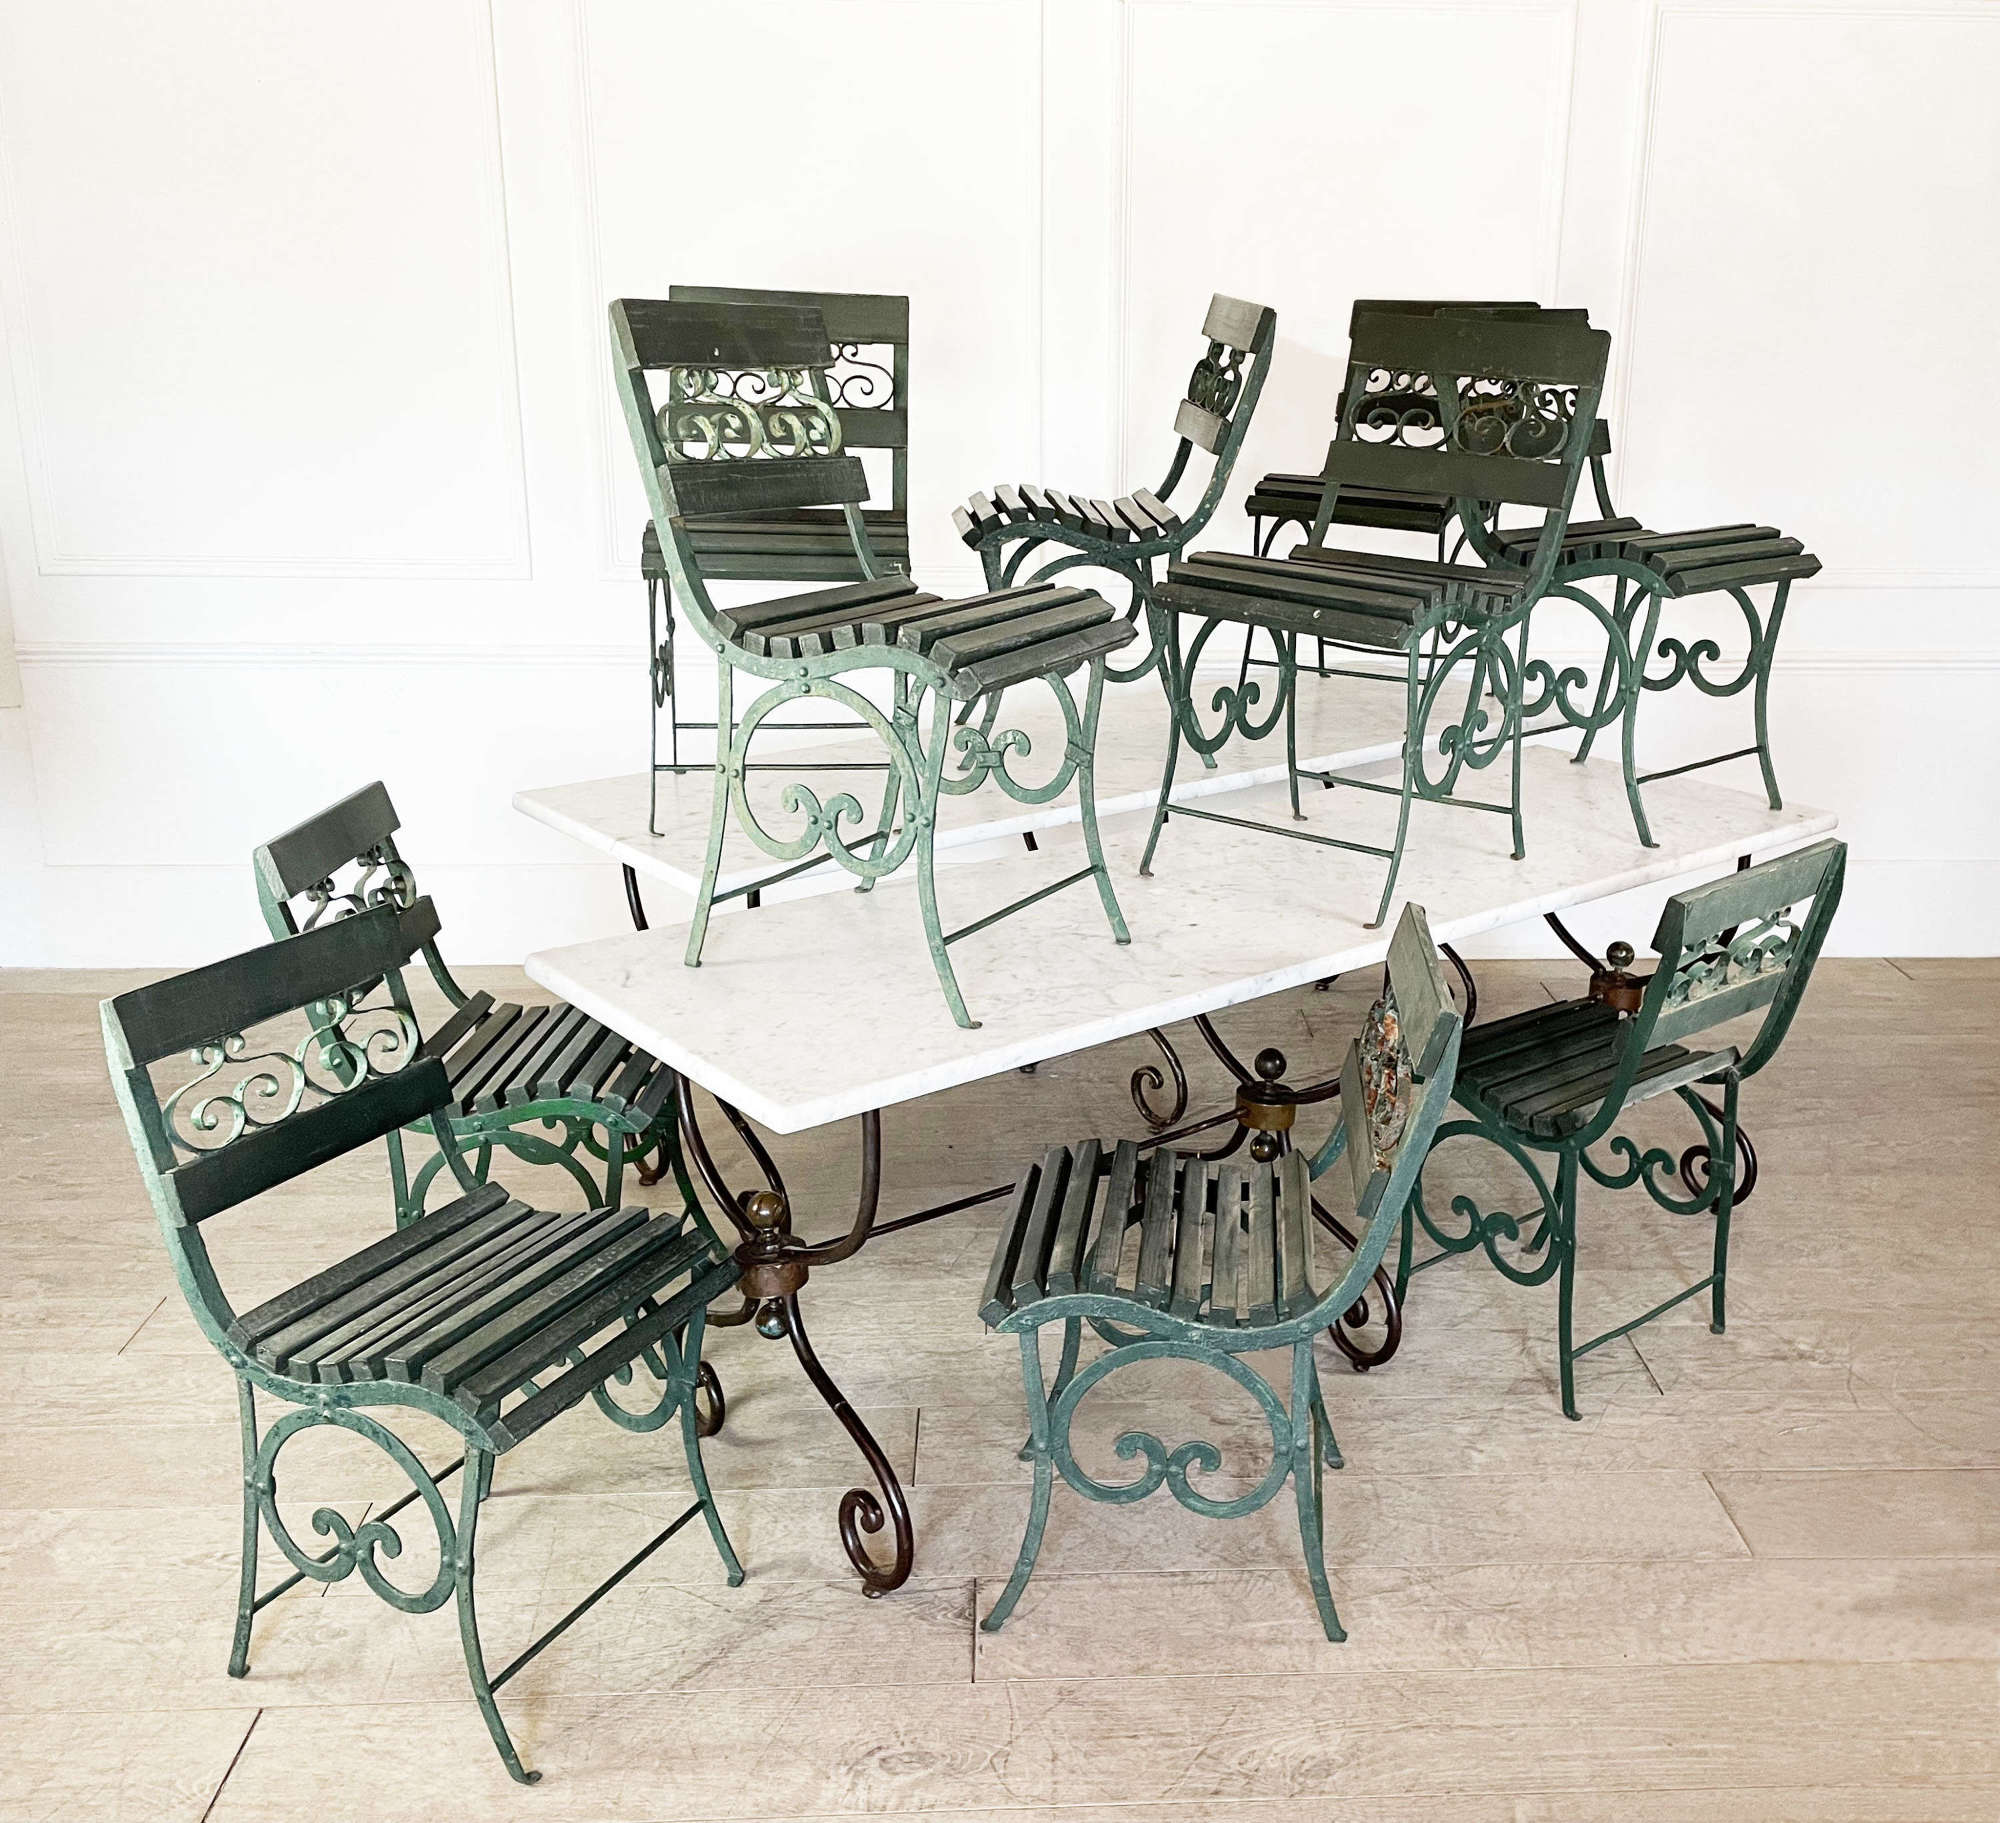 10 19th c French wrought iron and wood Chairs - circa 1880